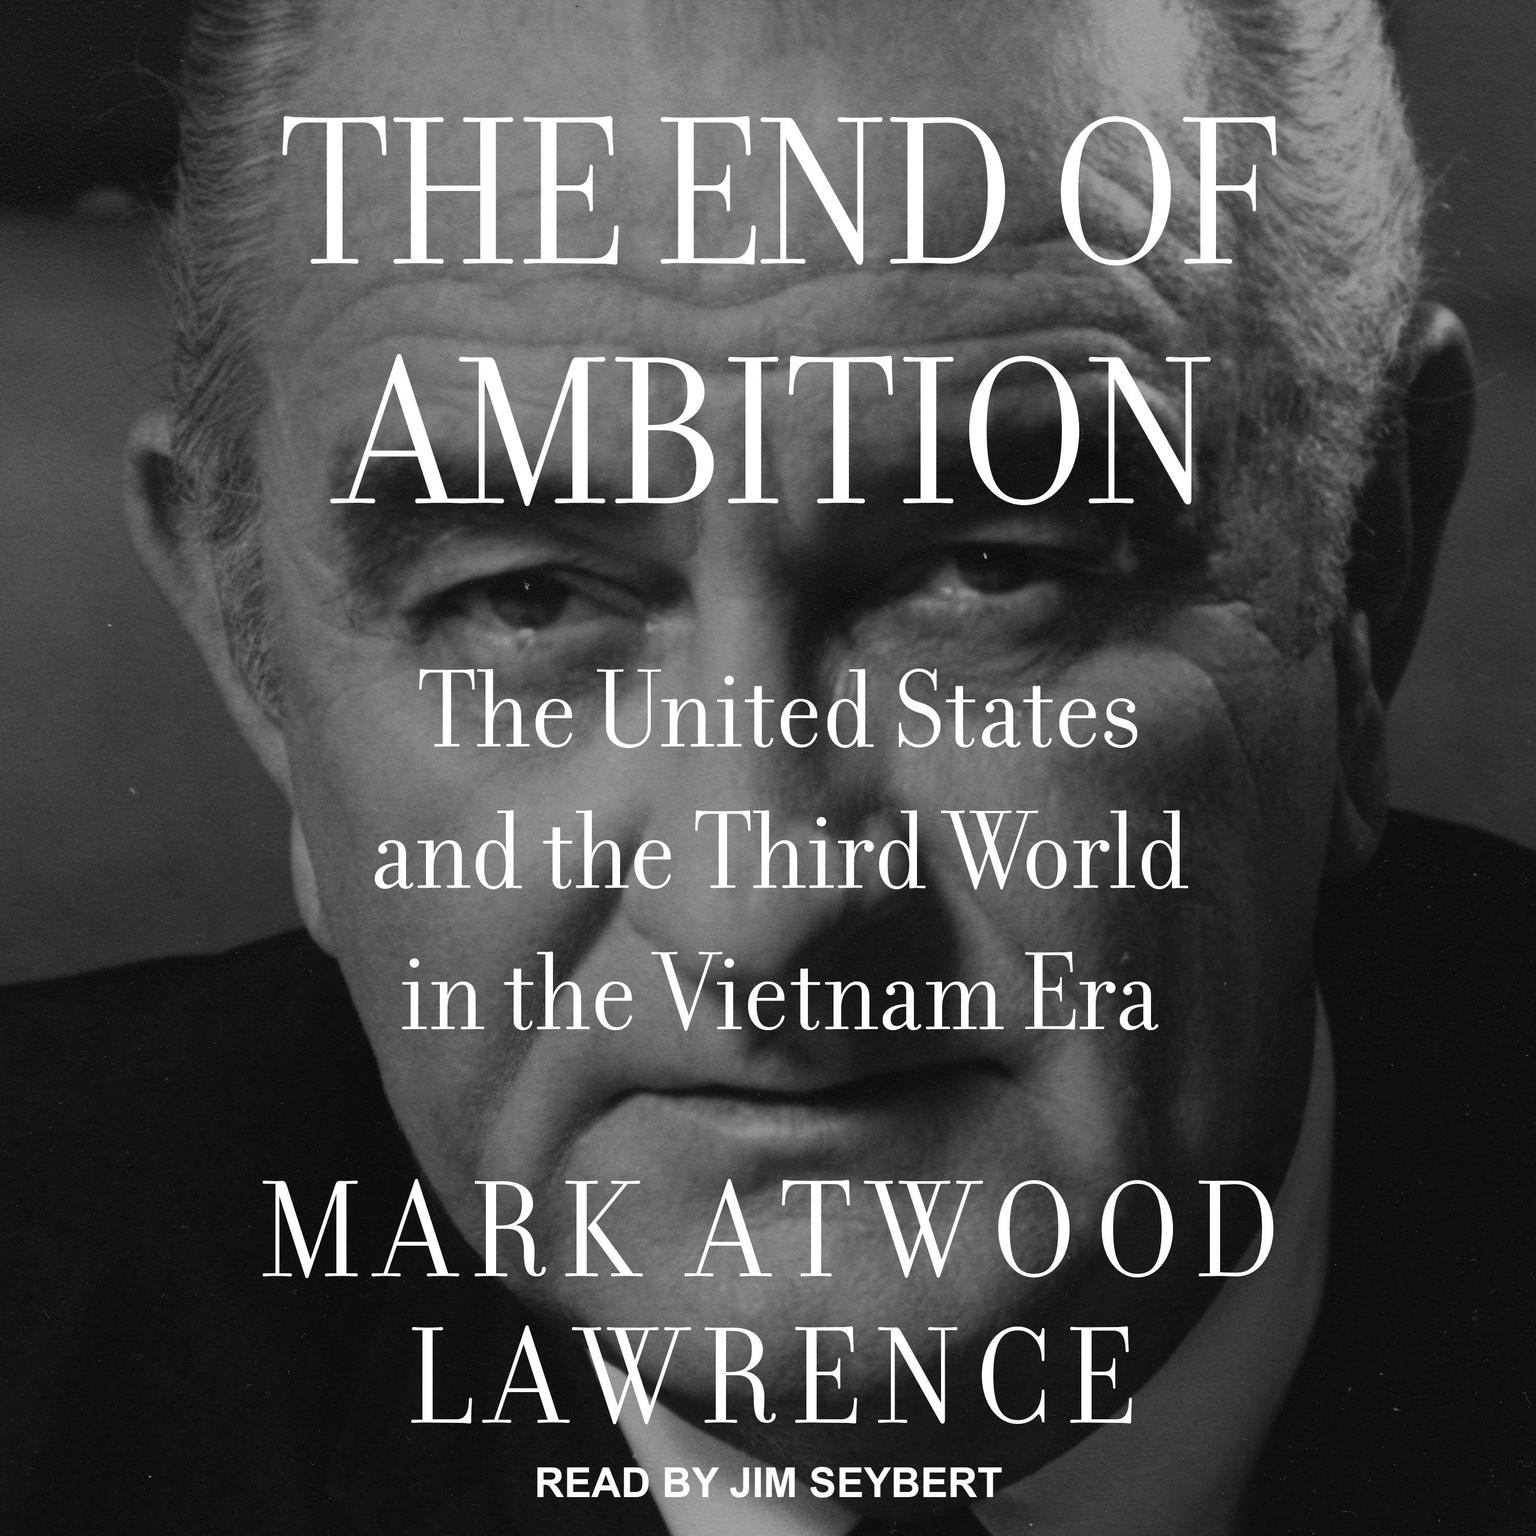 The End of Ambition: The United States and the Third World in the Vietnam Era Audiobook, by Mark Atwood Lawrence